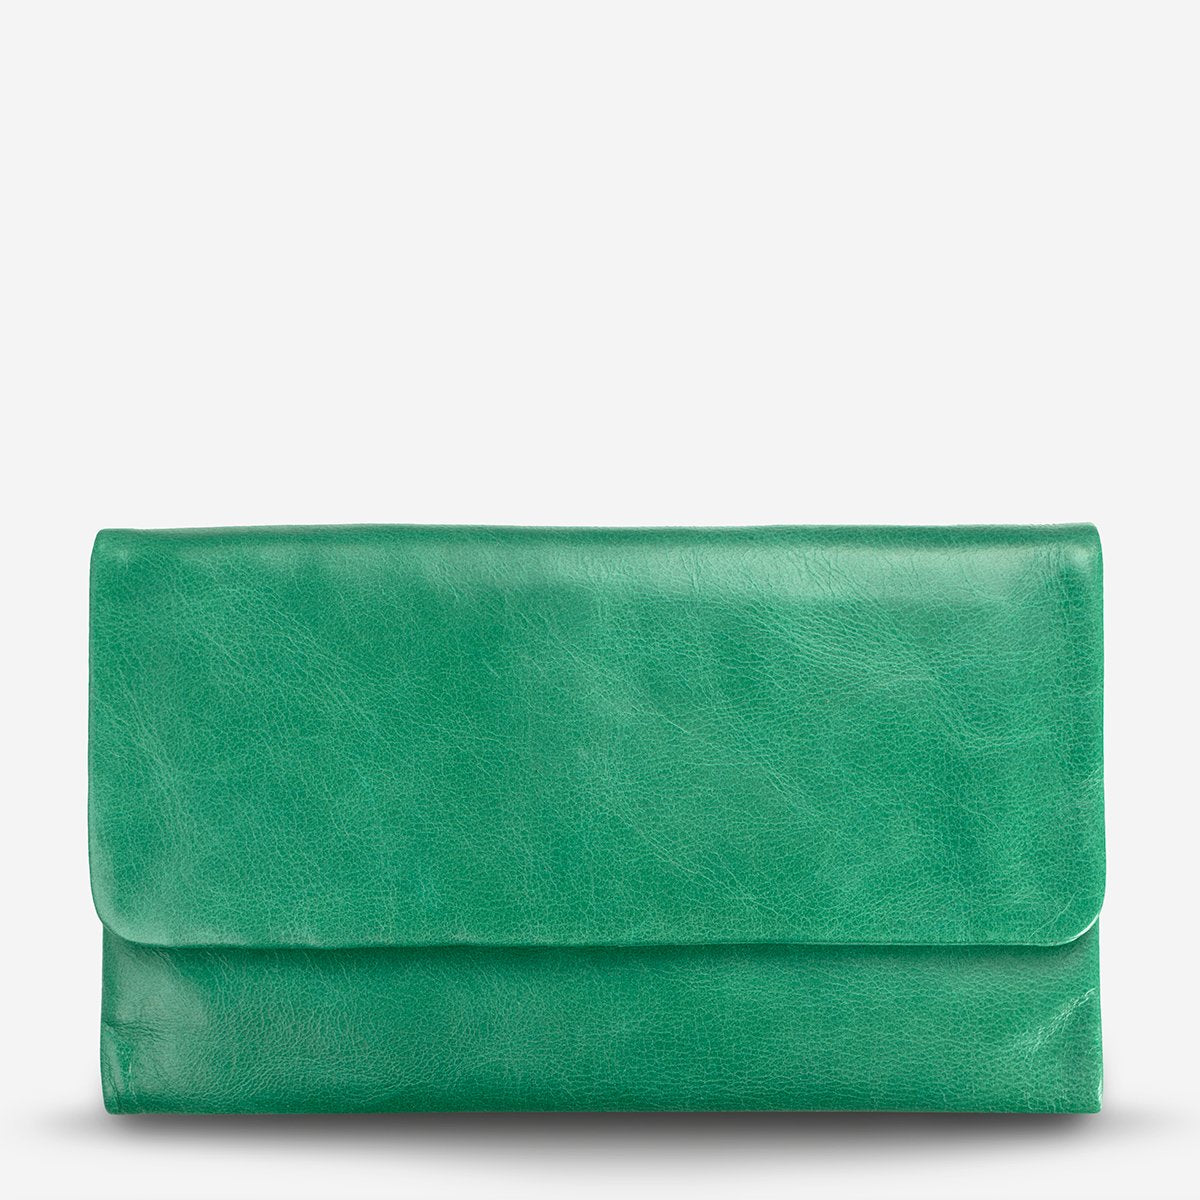 Status Anxiety Audrey Wallet in Emerald